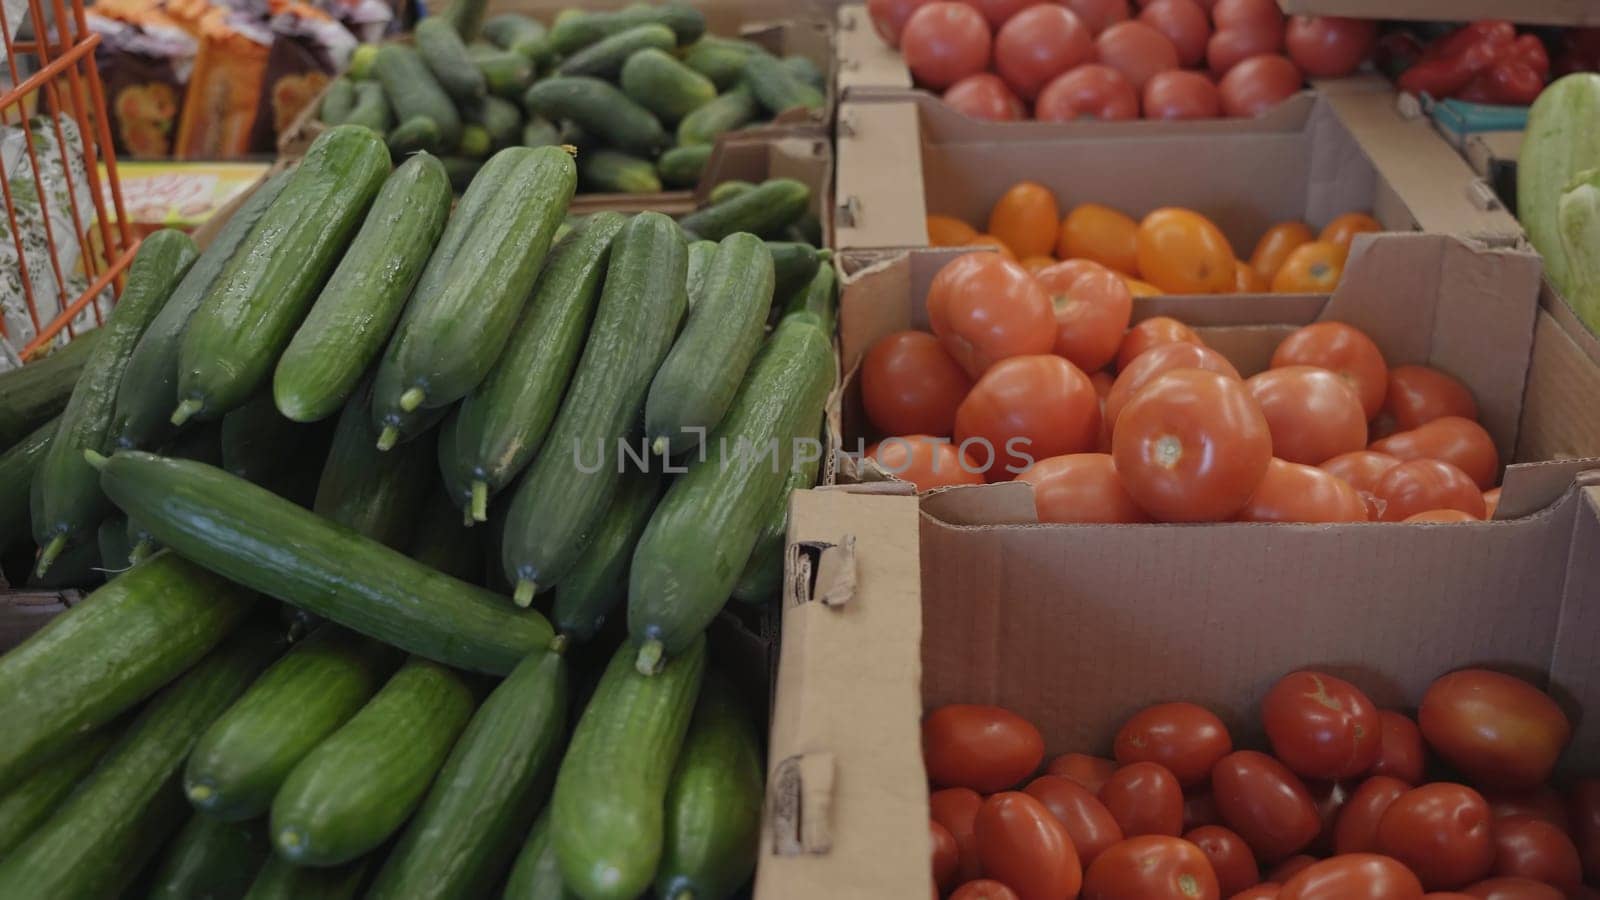 Tomatoes and cucumbers in the boxes of a large store